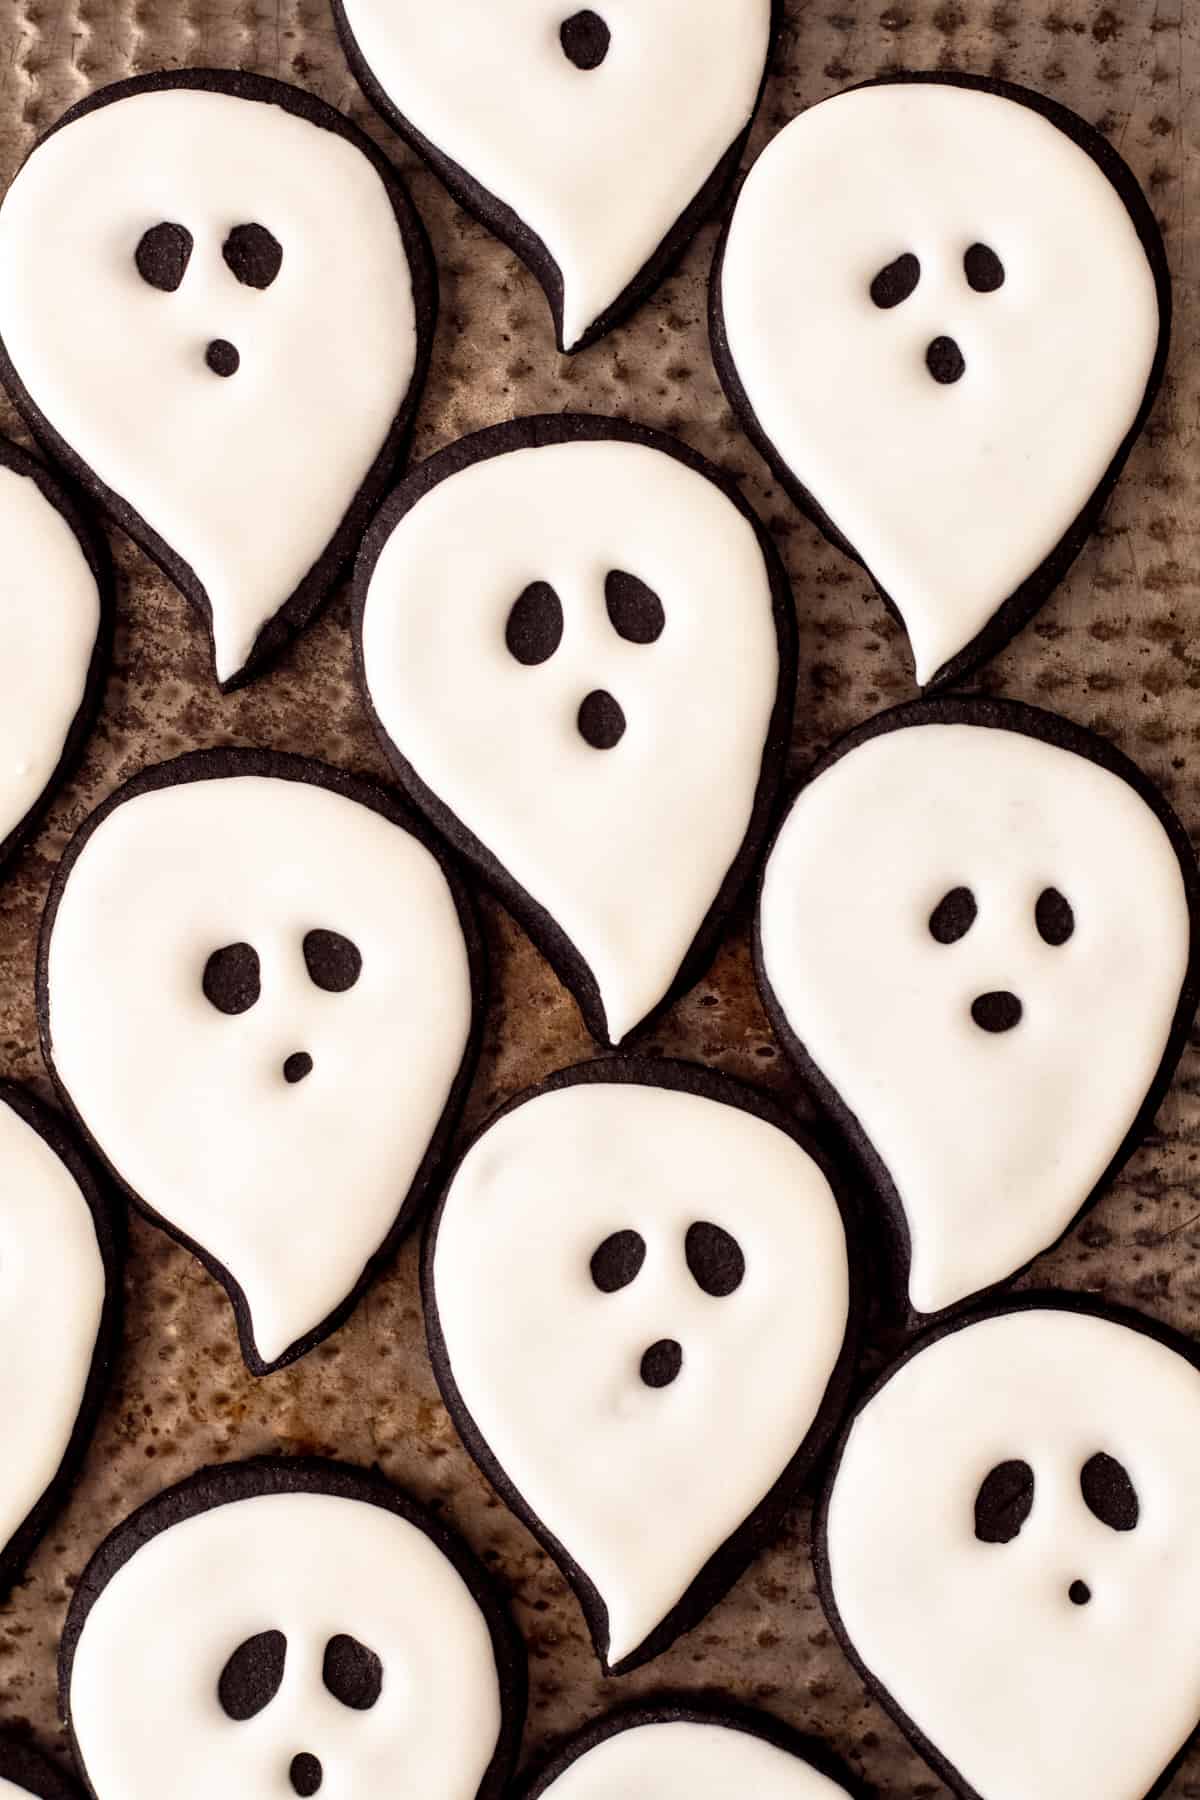 pan full of black cocoa cut out sugar ghost cookies decorated with white royal icing